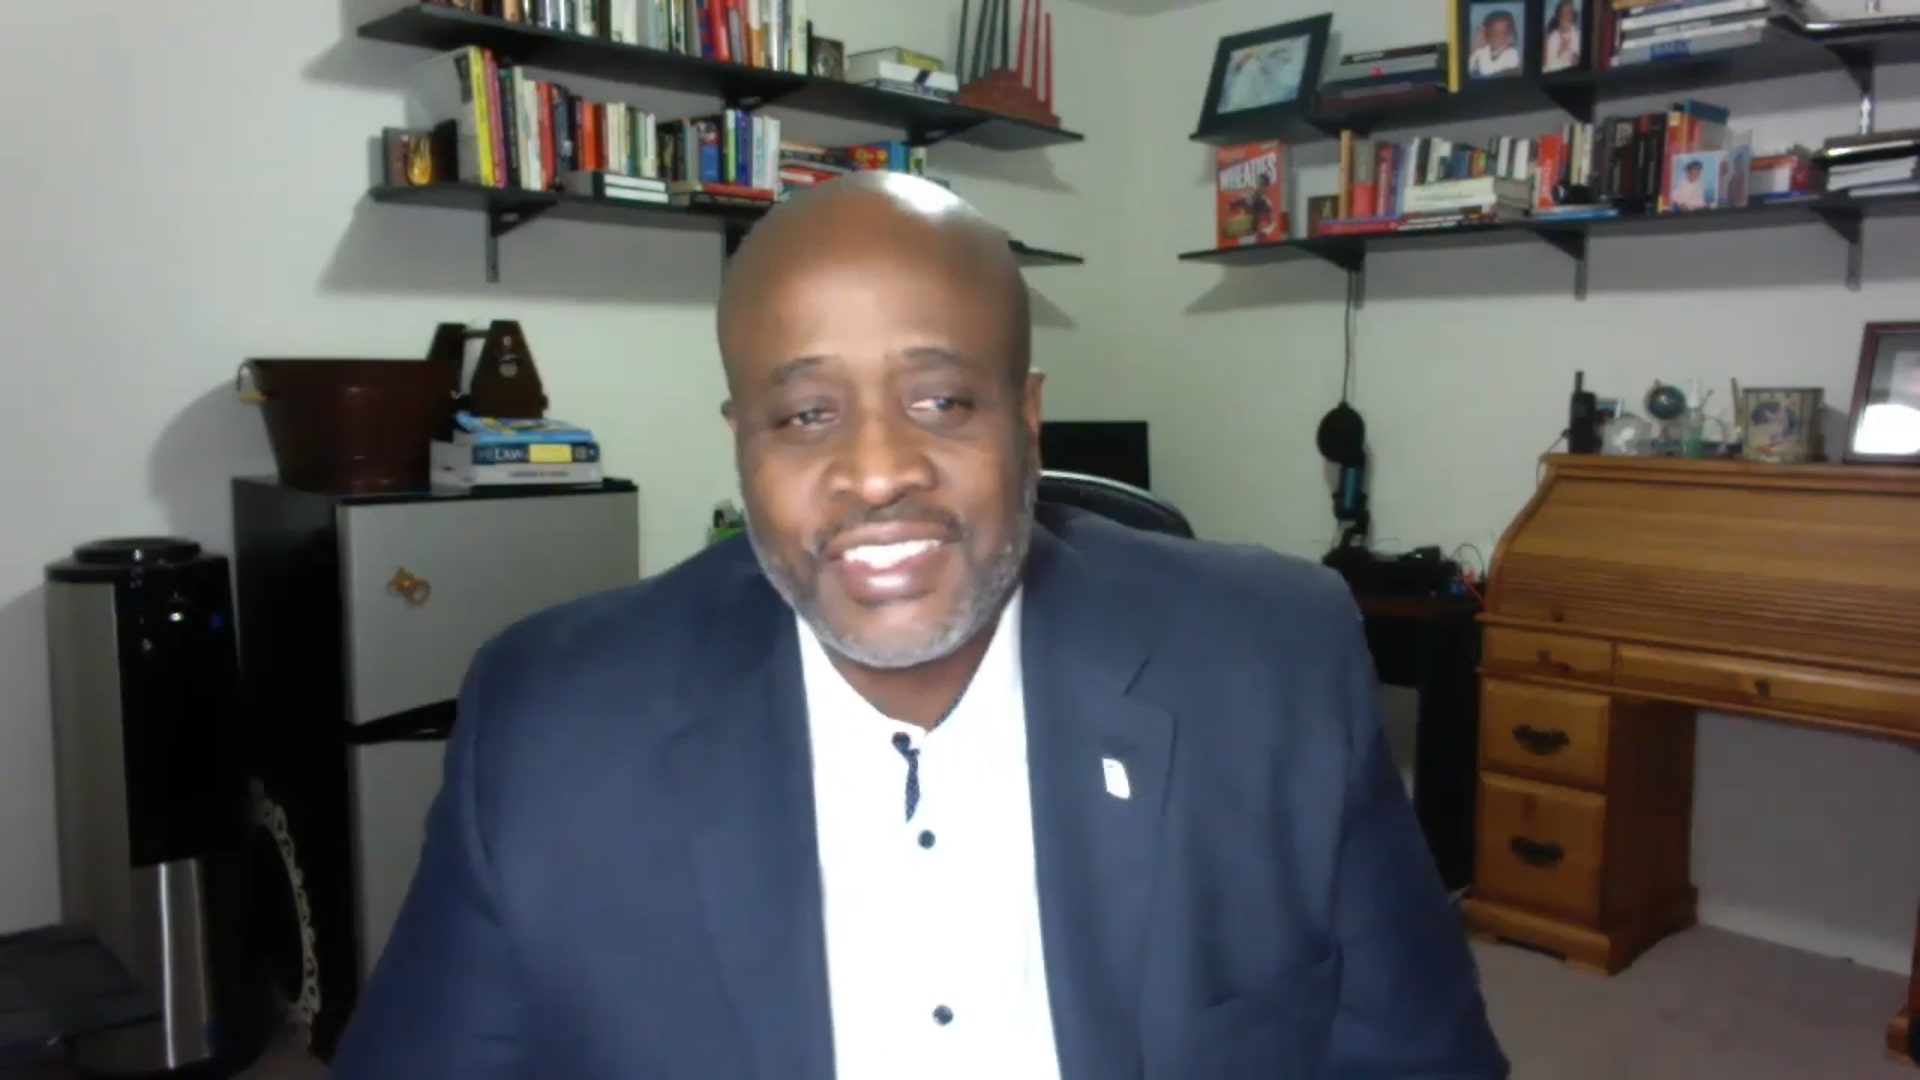 Roger J. Ward, interim provost, executive vice president, and dean of the Graduate School, introduces the University of Maryland, Baltimore community to the Academy of Lifelong Learning in a video featured on its website.